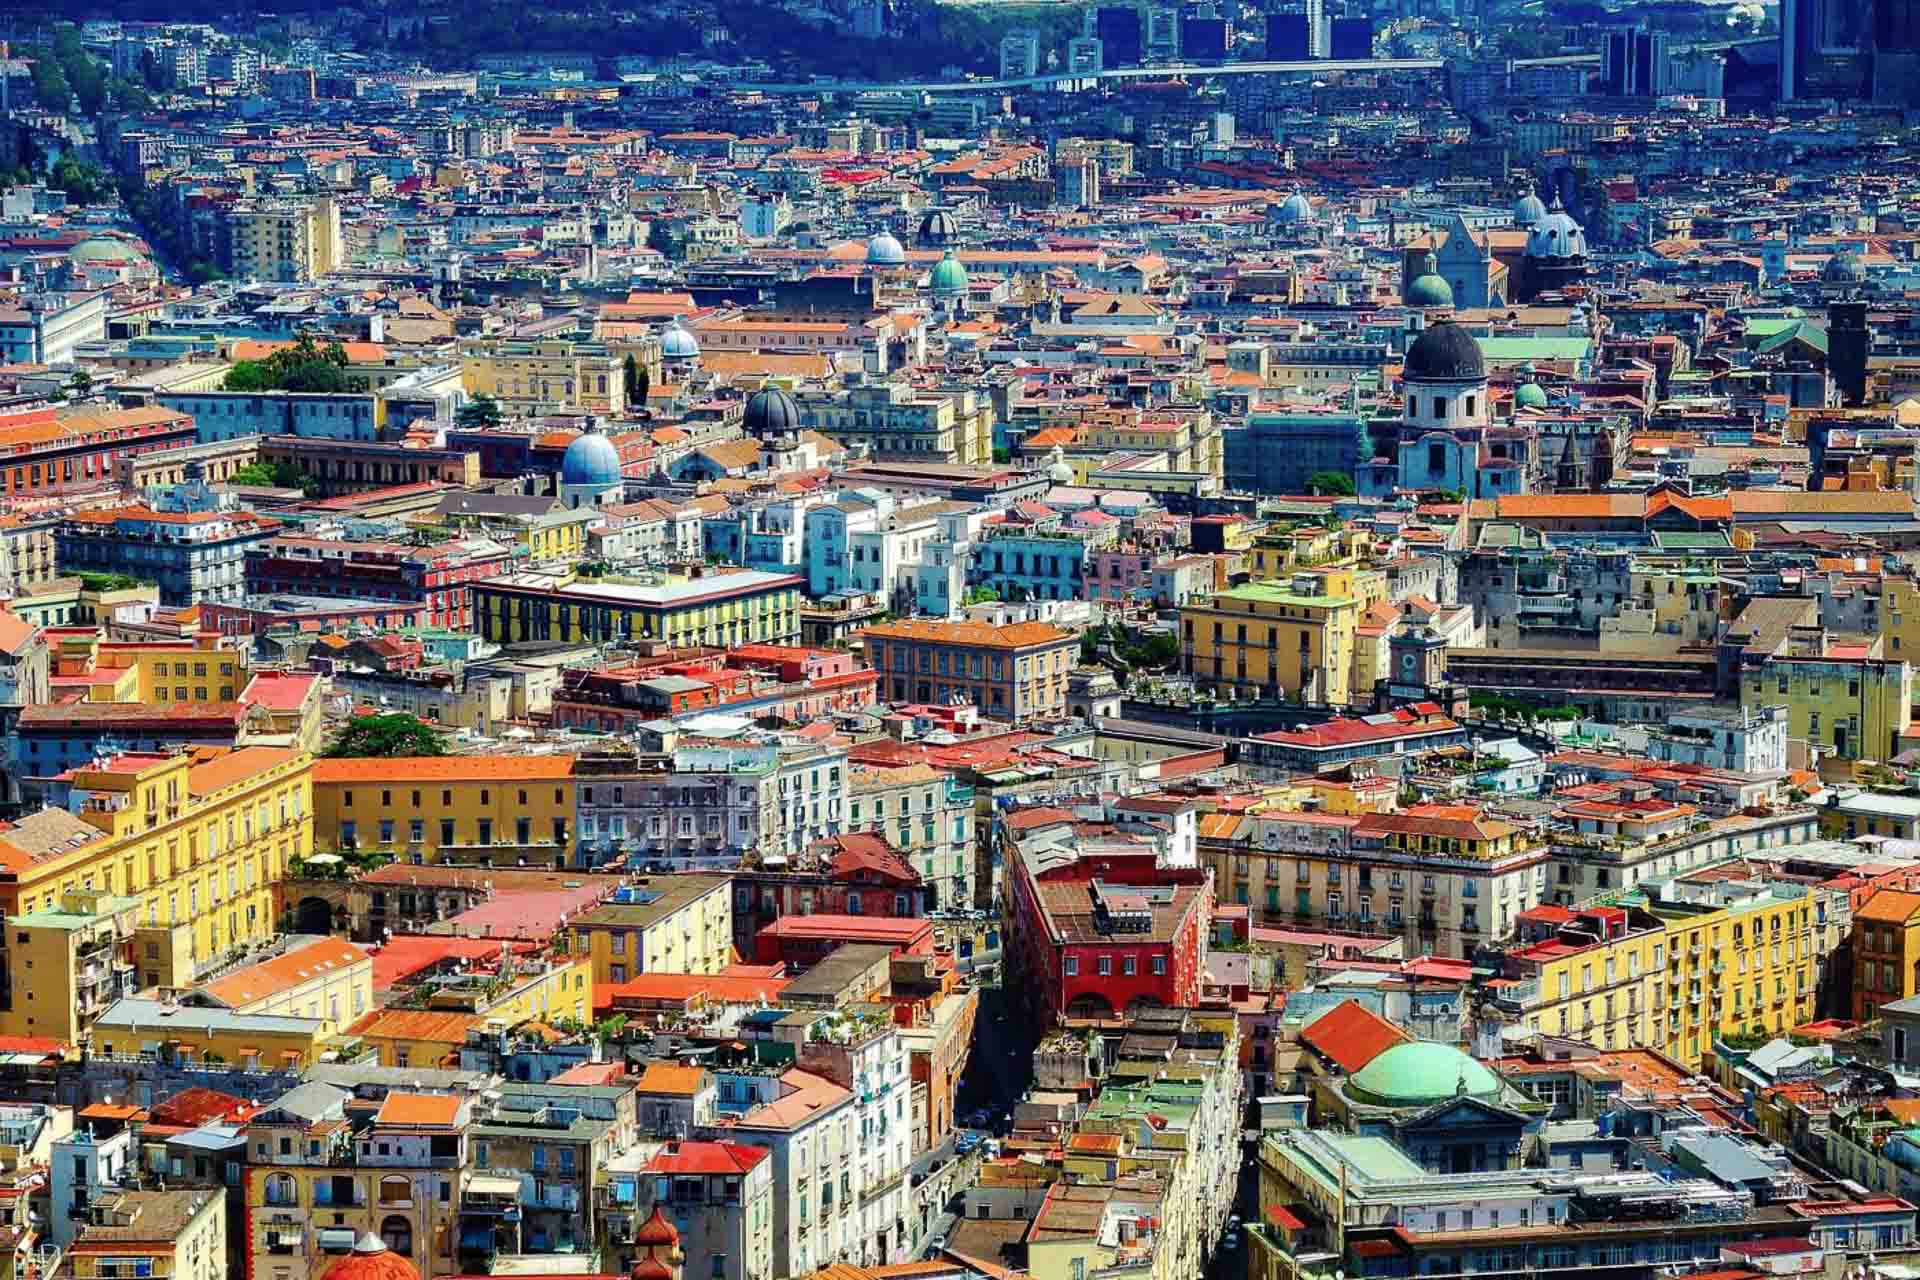 Aerial view of the city of Naples with many colourful houses